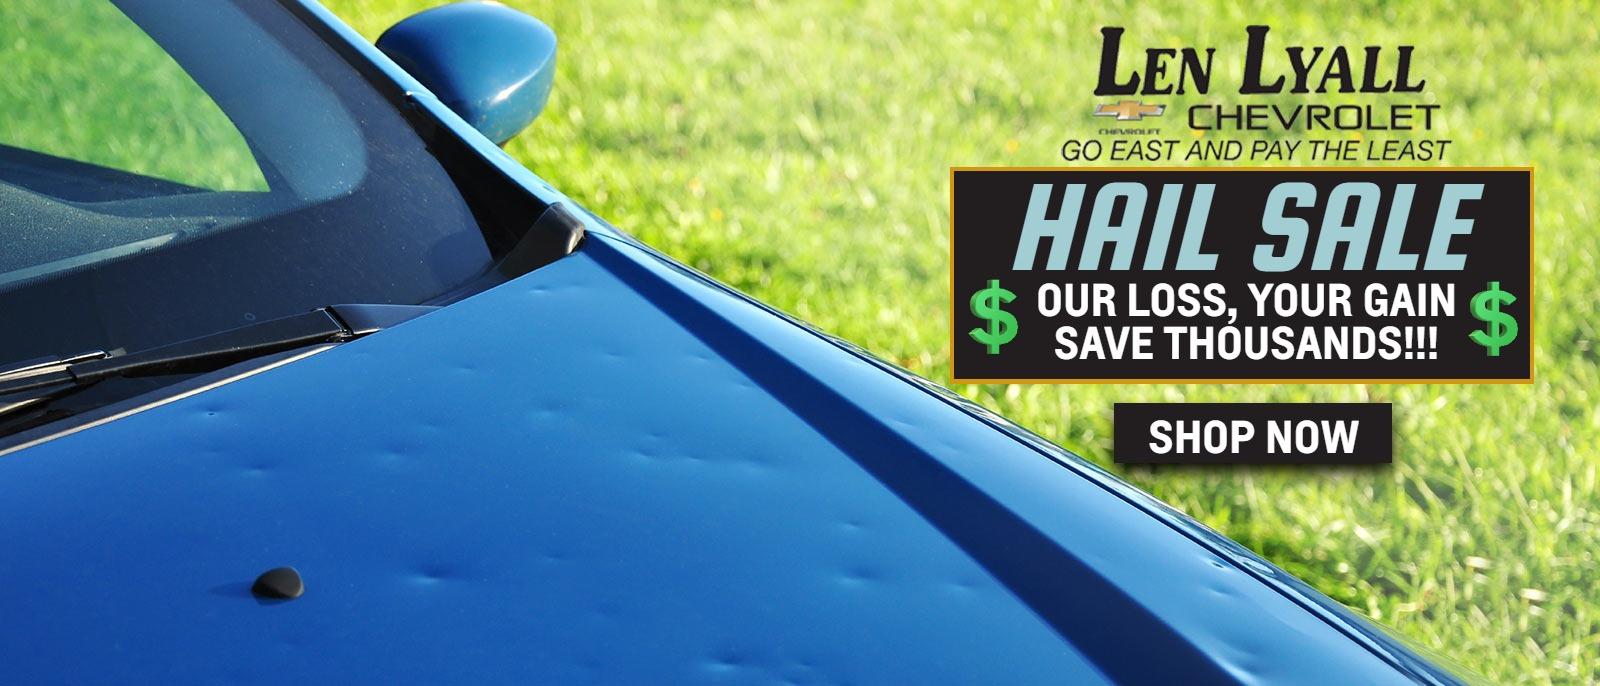 HAIL SALE AT LEN LYALL CHEVROLET IN AURORA, CO. SAVE THOUSANDS OF DOLLARS ON HAIL DAMAGED VEHICLES!